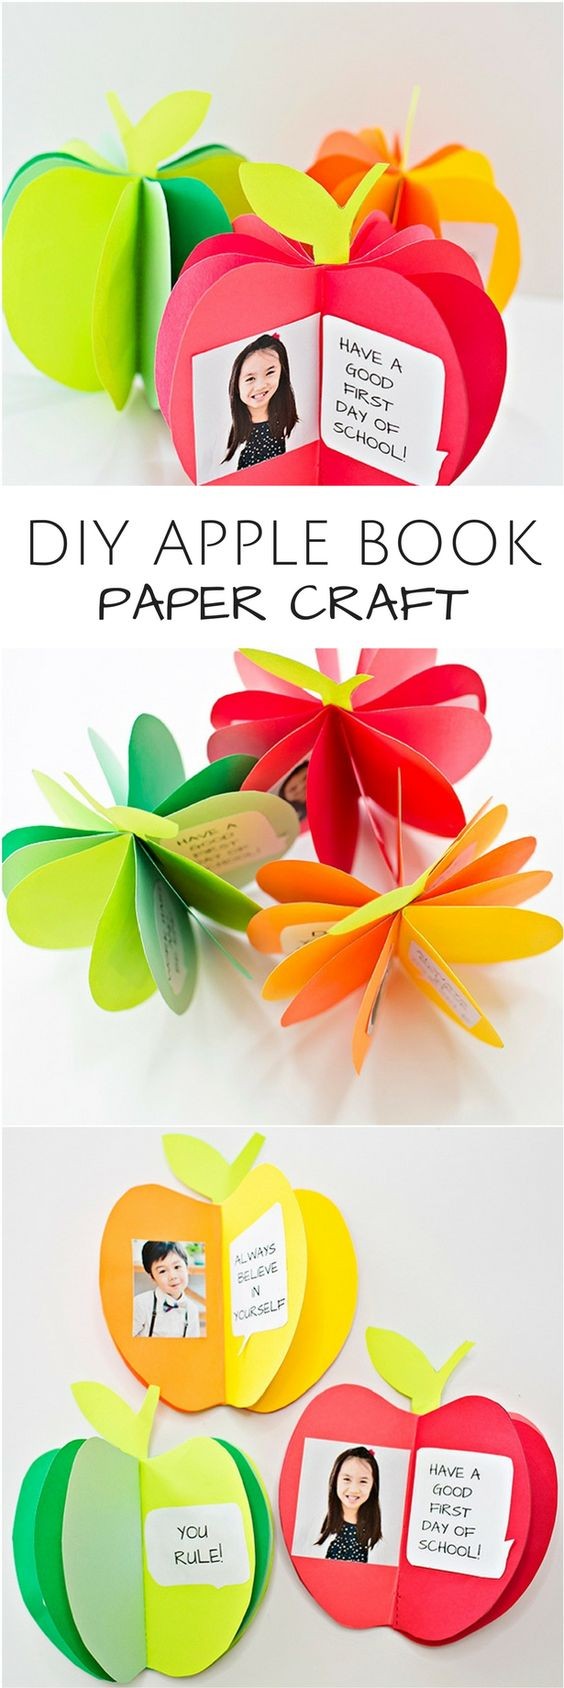 Papercraft Projects Diy 3d Apple Book Paper Craft Cute Back to School Craft for Kids or